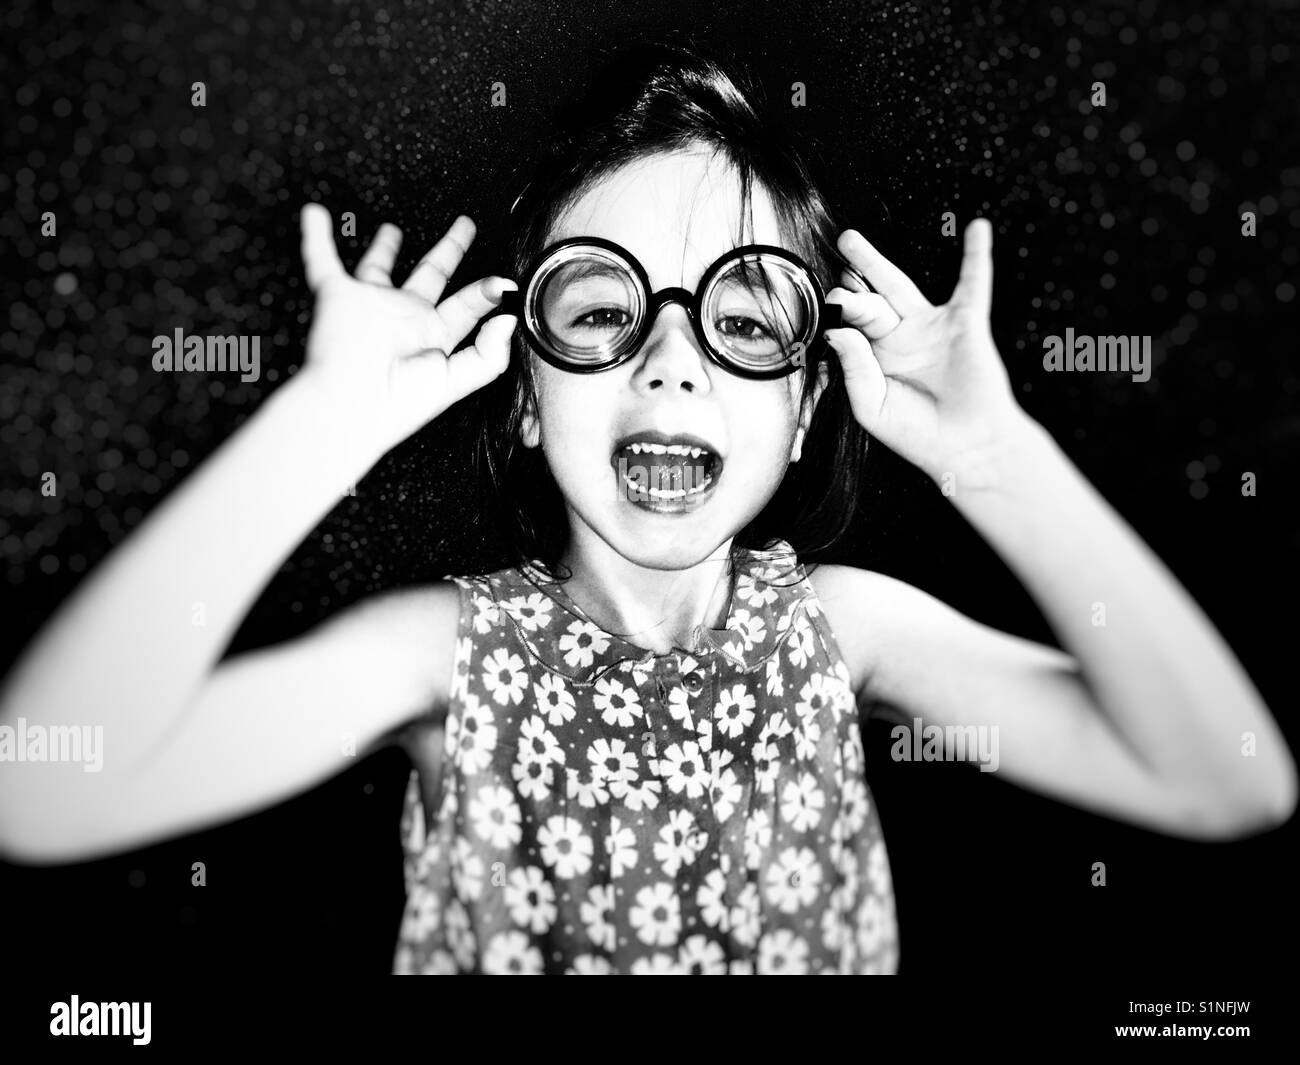 Child wearing a smile and comedy glasses Stock Photo